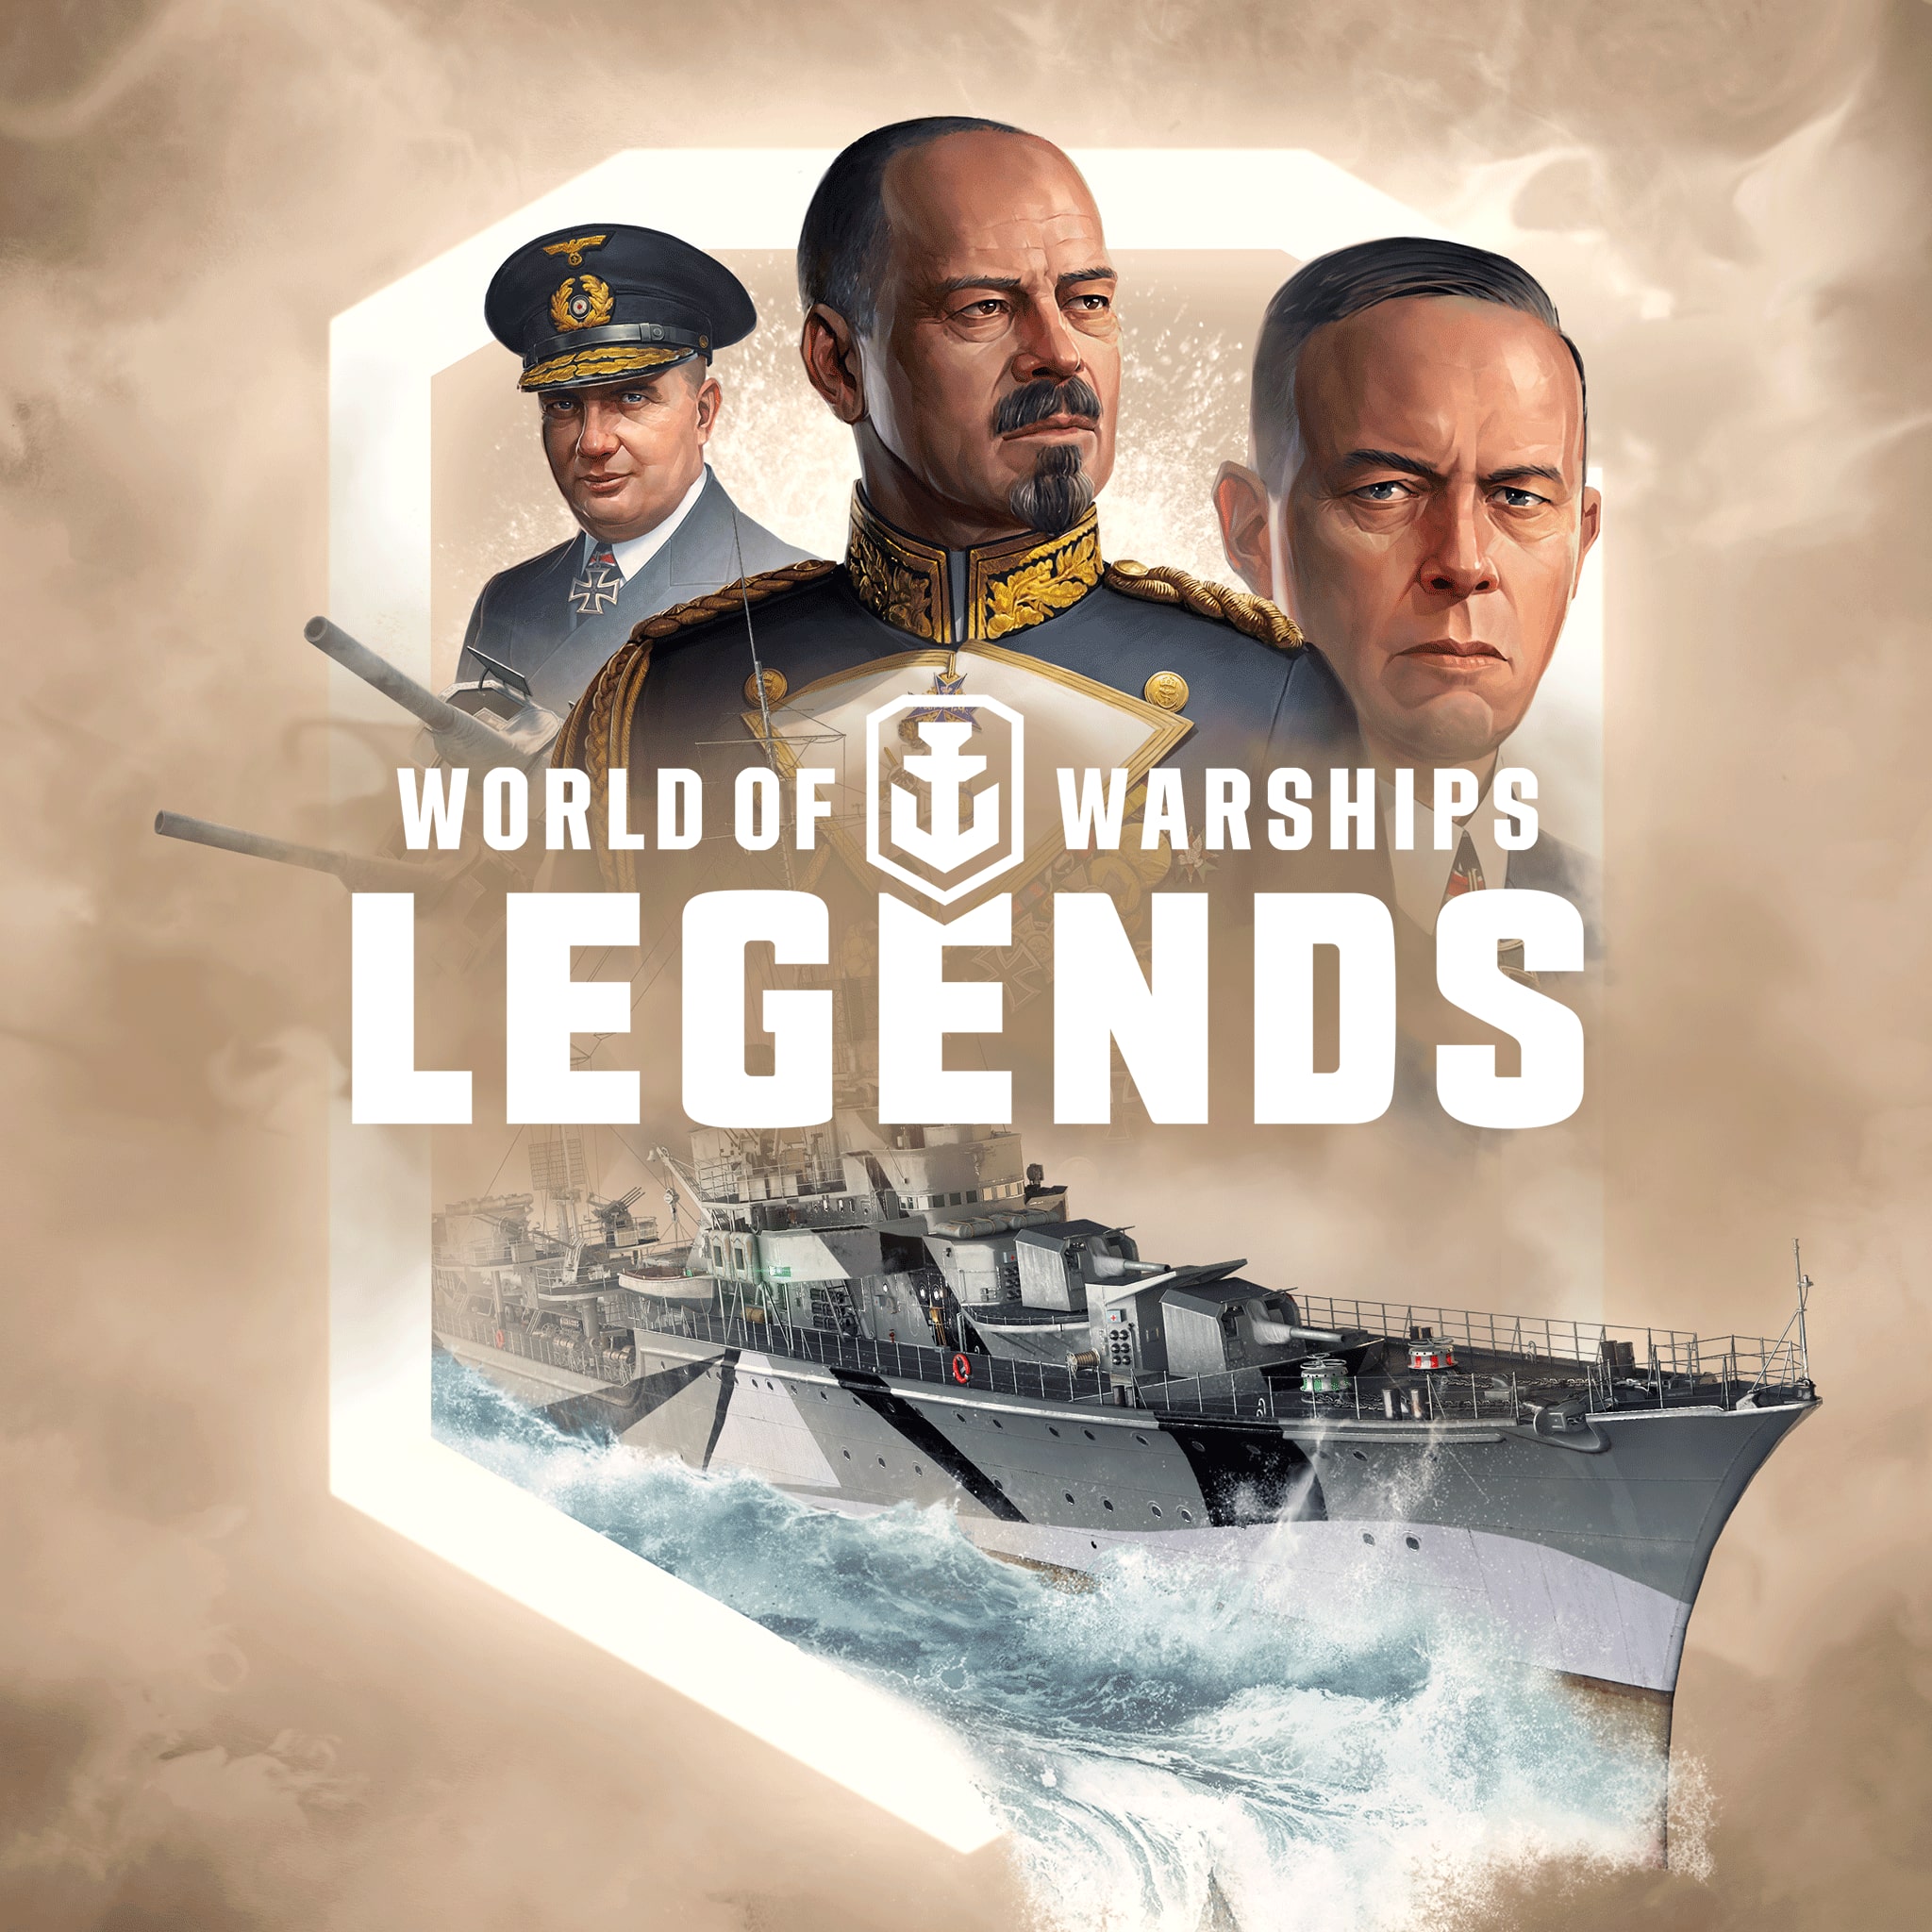 World of Warships: Legends – PS4 Torpedo Specialist